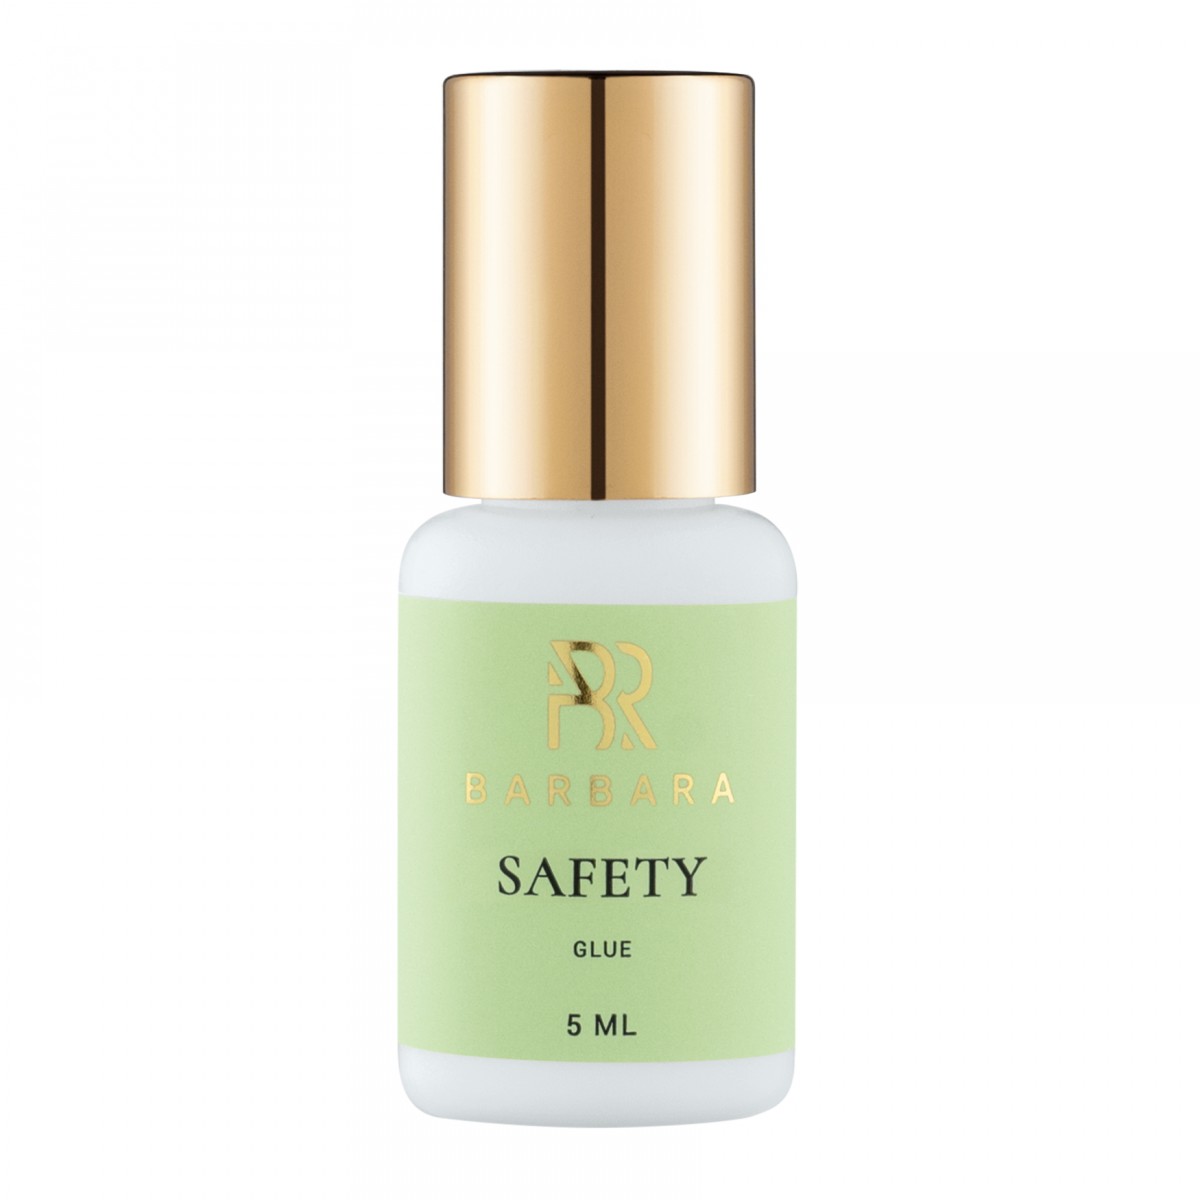 COLLA SAFETY (5 ml)